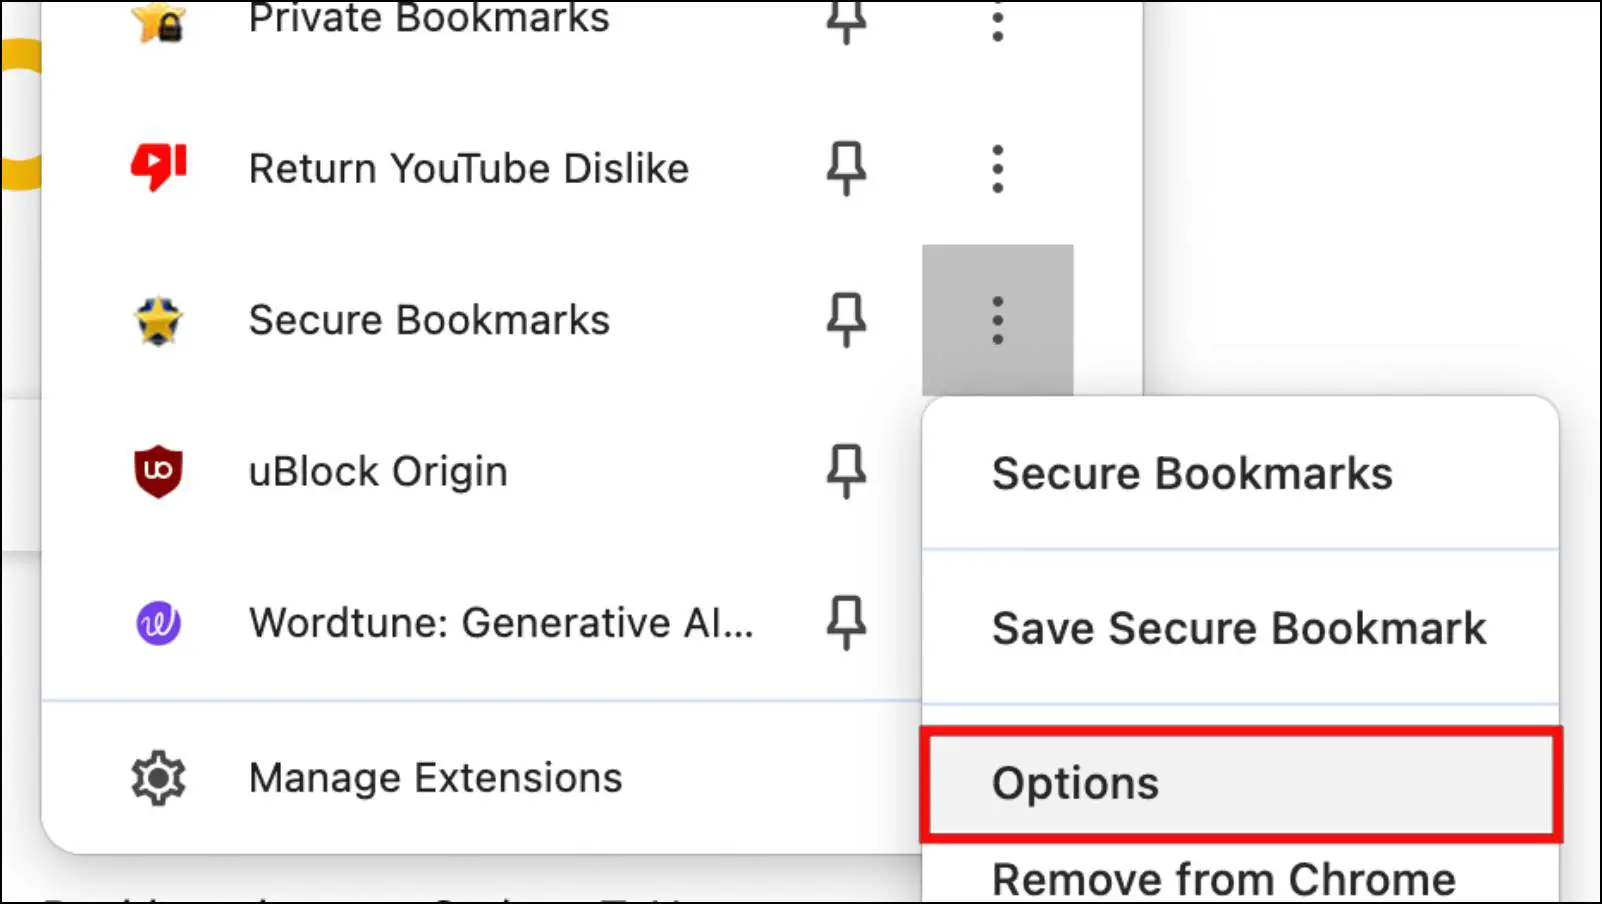 Go to Options for Secure Bookmarks